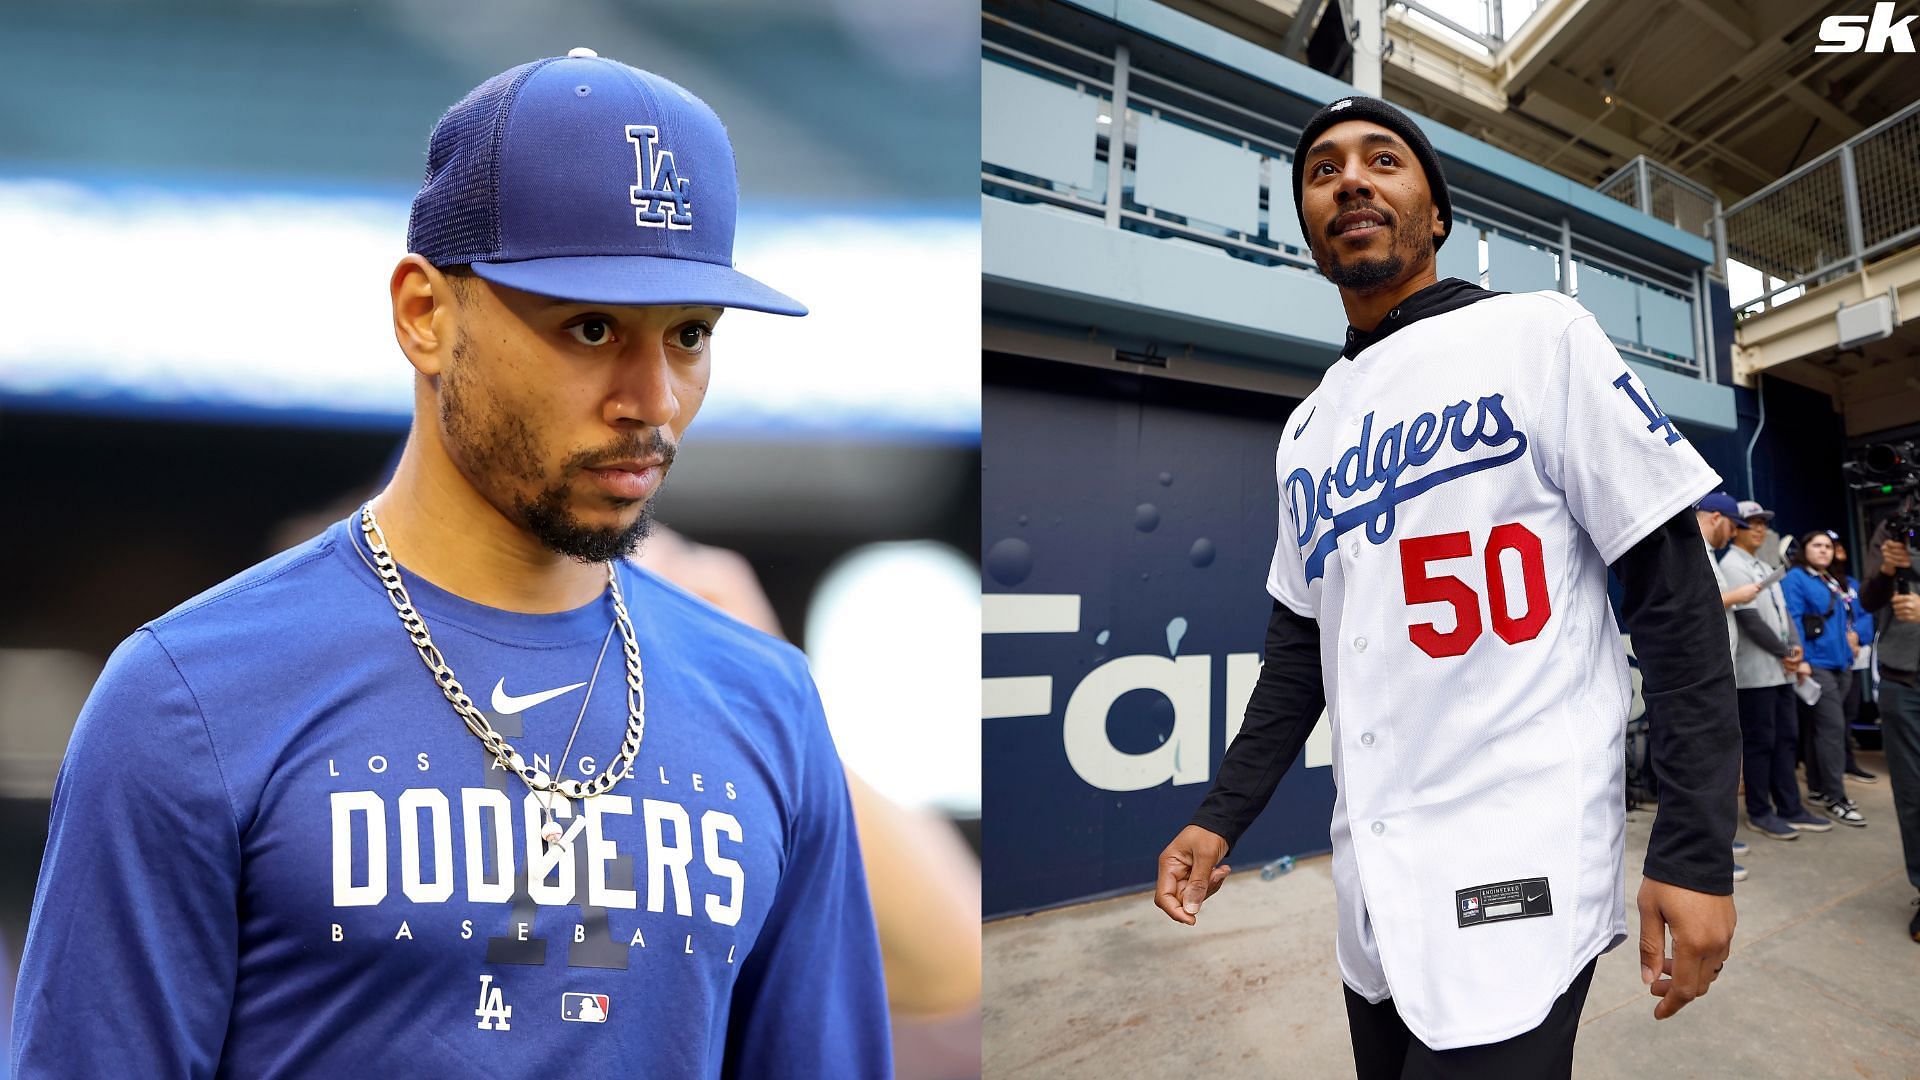 Mookie Betts of the Los Angeles Dodgers during DodgerFest at Dodger Stadium 